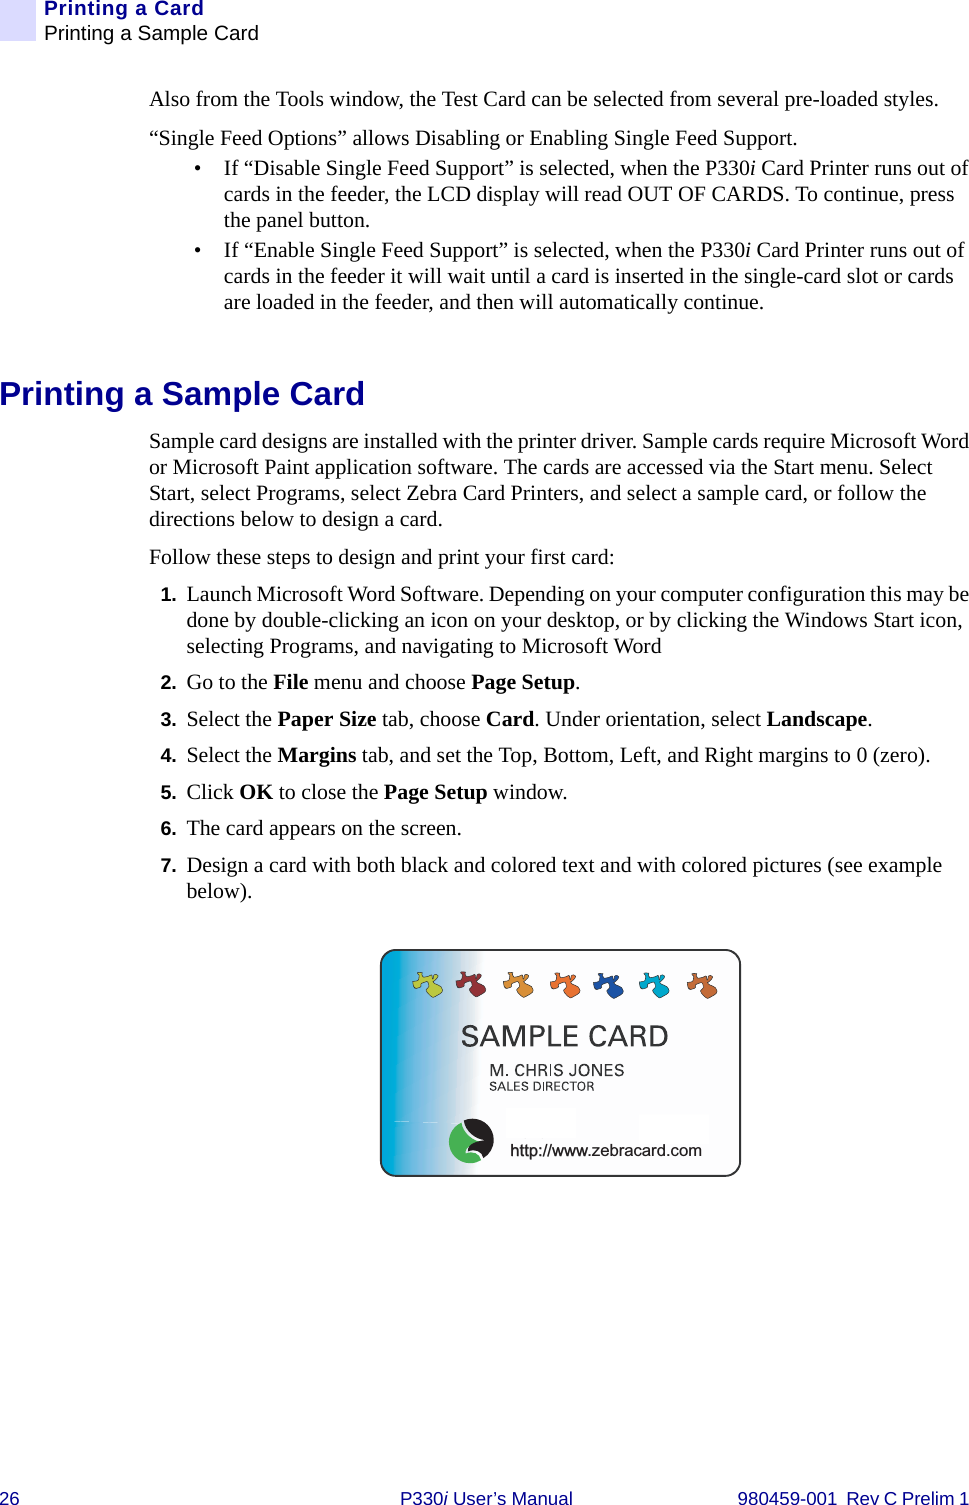 26 P330i User’s Manual 980459-001  Rev C Prelim 1 Printing a CardPrinting a Sample CardAlso from the Tools window, the Test Card can be selected from several pre-loaded styles.“Single Feed Options” allows Disabling or Enabling Single Feed Support.• If “Disable Single Feed Support” is selected, when the P330i Card Printer runs out of cards in the feeder, the LCD display will read OUT OF CARDS. To continue, press the panel button.• If “Enable Single Feed Support” is selected, when the P330i Card Printer runs out of cards in the feeder it will wait until a card is inserted in the single-card slot or cards are loaded in the feeder, and then will automatically continue.Printing a Sample CardSample card designs are installed with the printer driver. Sample cards require Microsoft Word or Microsoft Paint application software. The cards are accessed via the Start menu. Select Start, select Programs, select Zebra Card Printers, and select a sample card, or follow the directions below to design a card.Follow these steps to design and print your first card:1. Launch Microsoft Word Software. Depending on your computer configuration this may be done by double-clicking an icon on your desktop, or by clicking the Windows Start icon, selecting Programs, and navigating to Microsoft Word2. Go to the File menu and choose Page Setup.3. Select the Paper Size tab, choose Card. Under orientation, select Landscape.4. Select the Margins tab, and set the Top, Bottom, Left, and Right margins to 0 (zero).5. Click OK to close the Page Setup window.6. The card appears on the screen.7. Design a card with both black and colored text and with colored pictures (see example below).us!http://www.zebracard.com